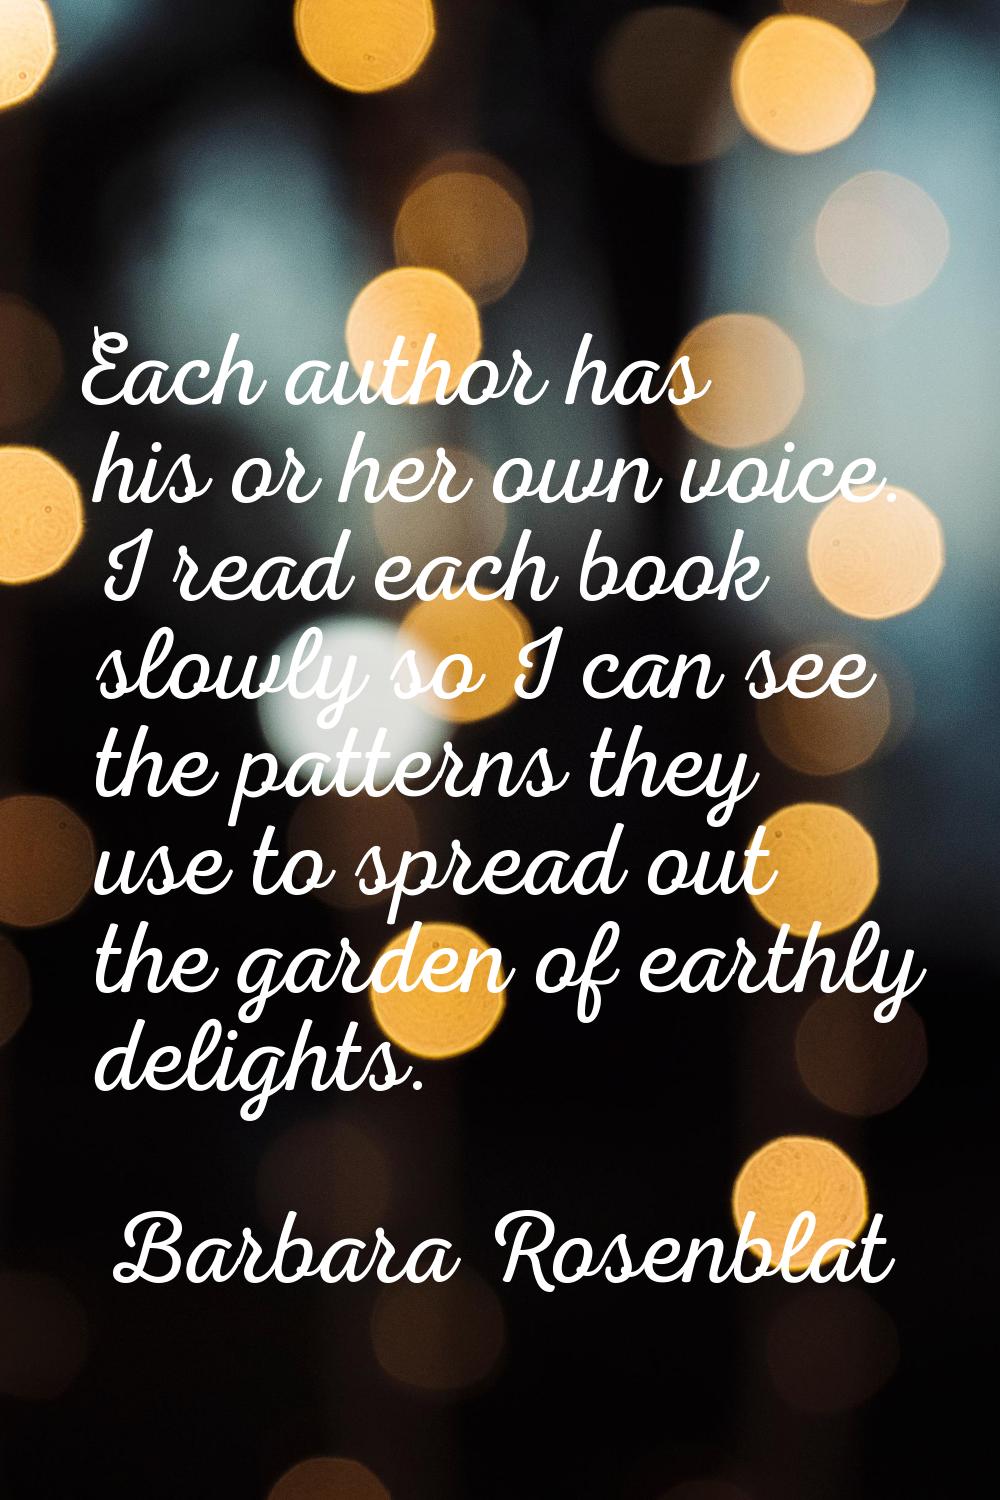 Each author has his or her own voice. I read each book slowly so I can see the patterns they use to